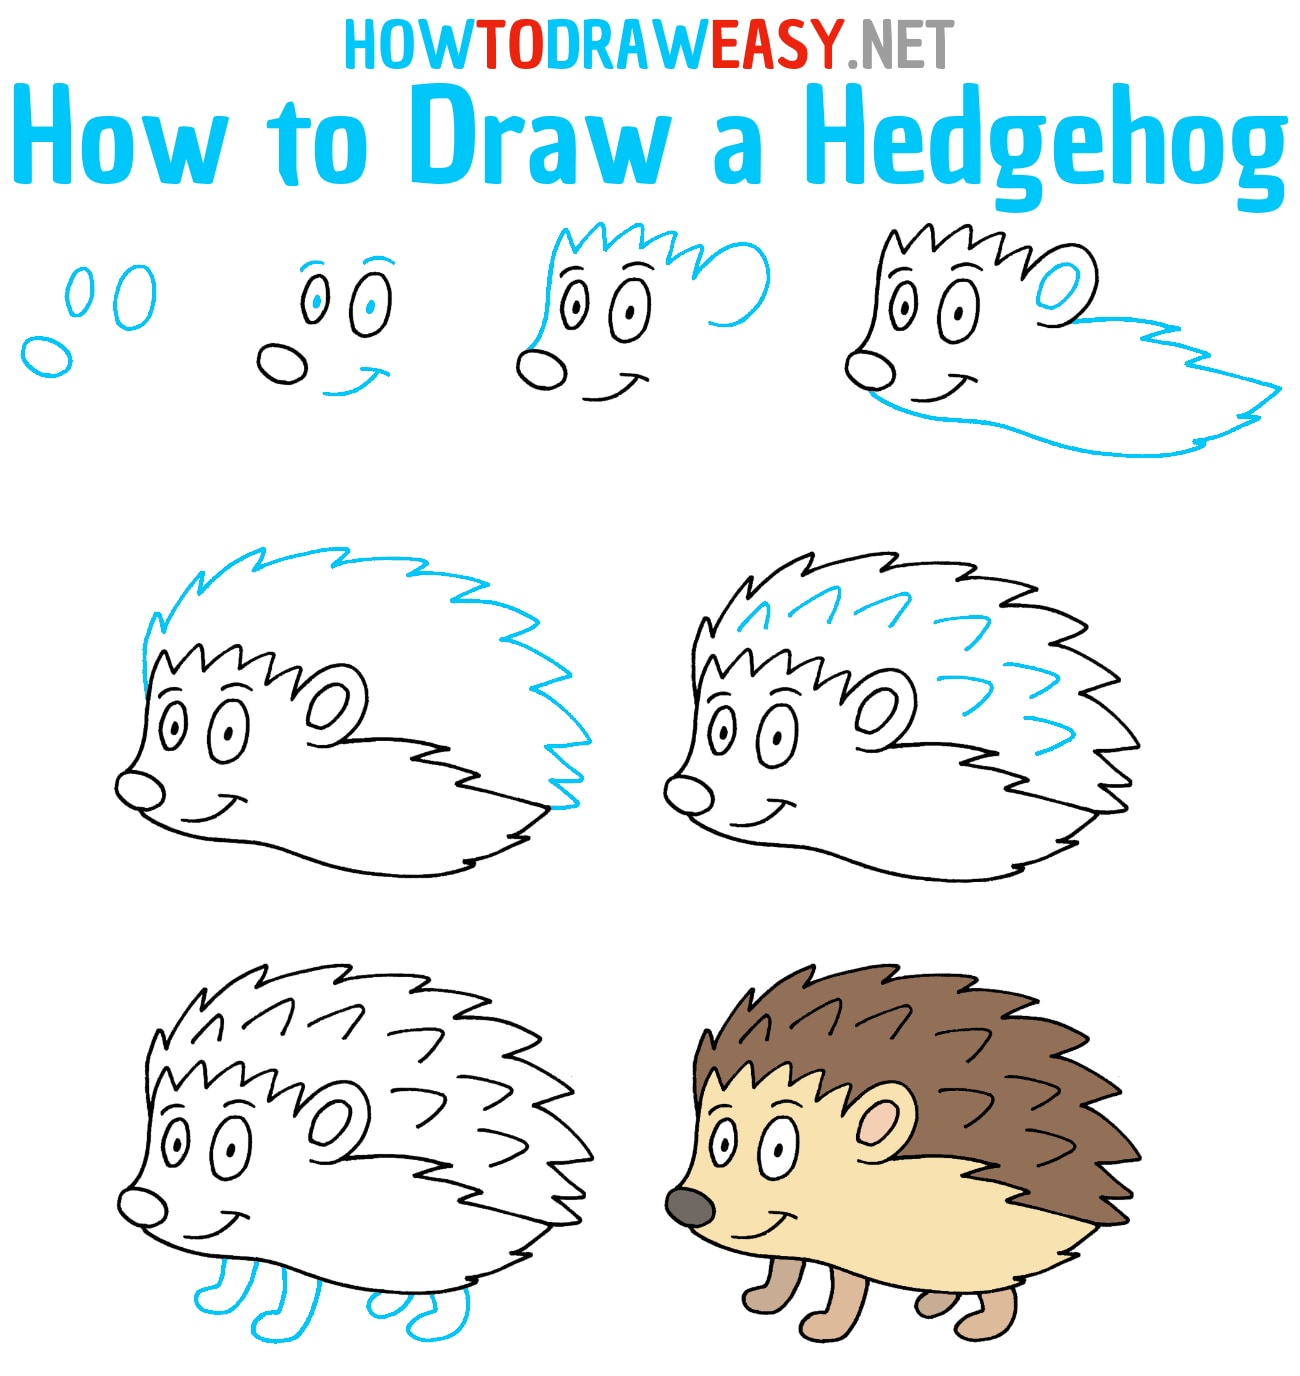 How to Draw a Hedgehog Step by Step